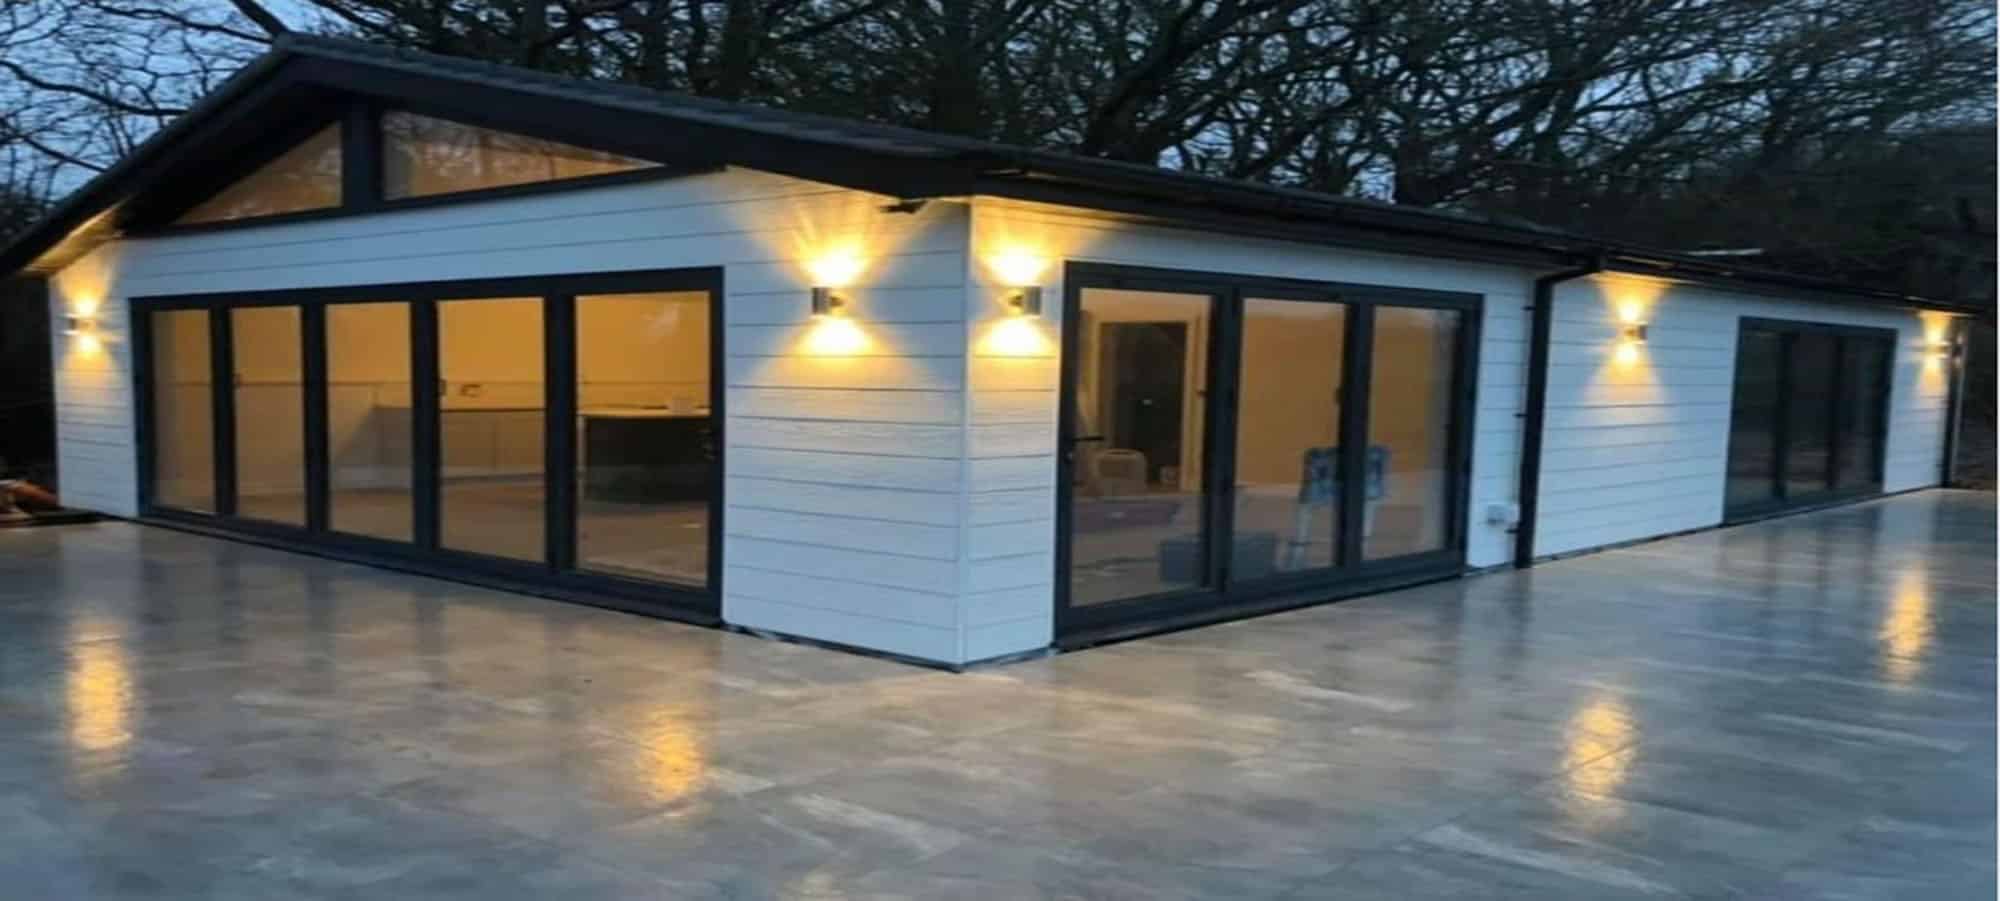 bifolds great for winter